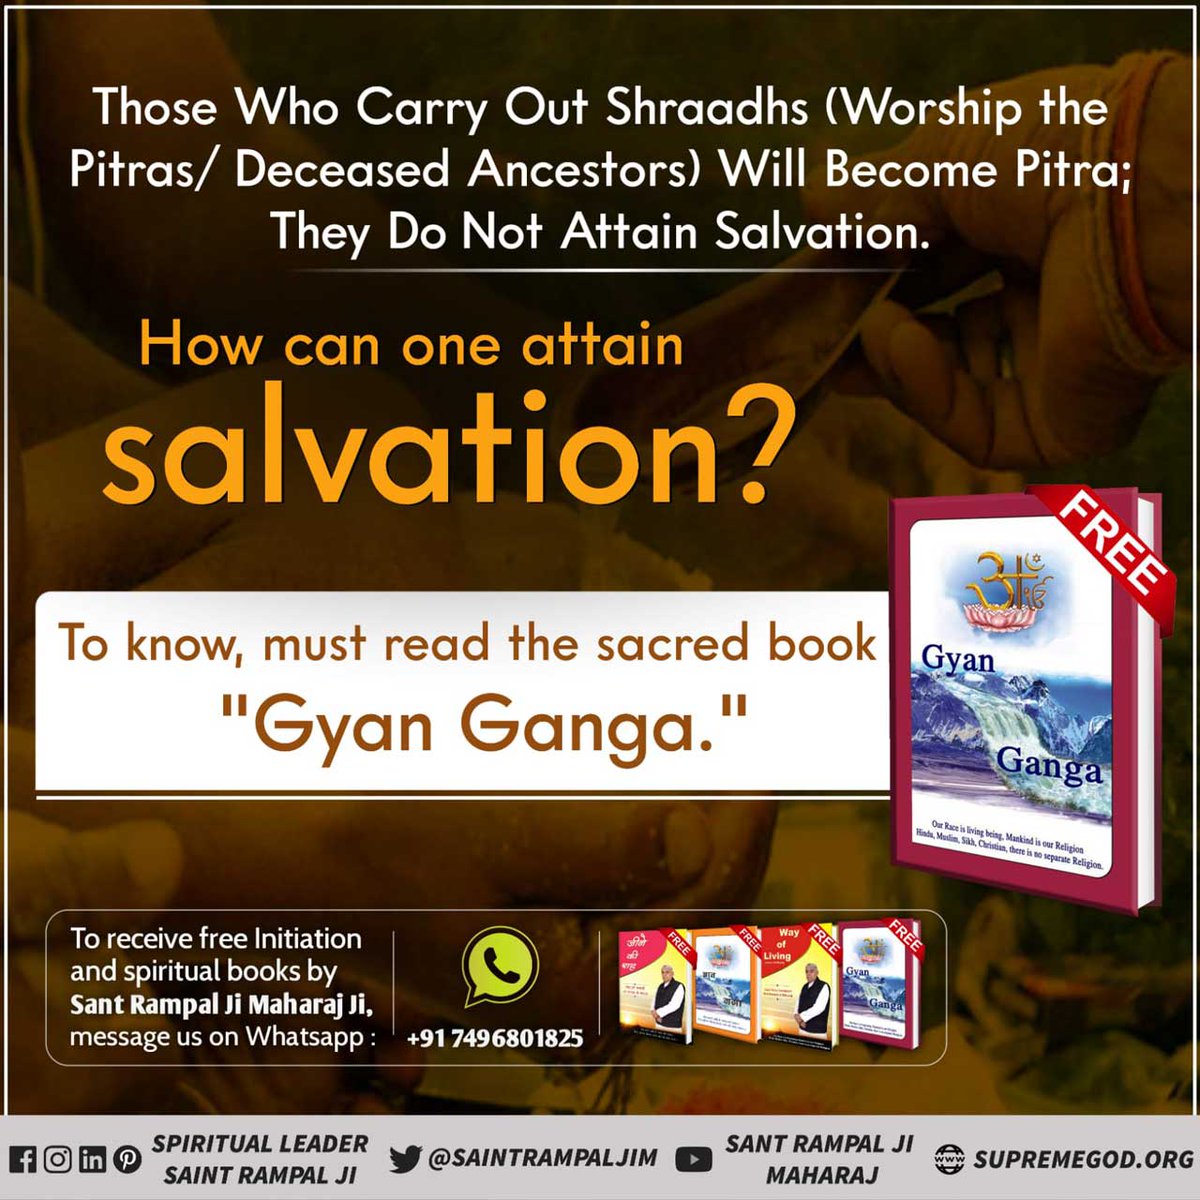 #GodMorningThursday
Those Who Carry Out Shraadhs (Worship the Pitras/Deceased Ancestors) Will Become Pitra; 
They do Not Attain Salvation.
How can one attain
Salvation ?
To know more, must read the previous book 'Gyan Ganga''